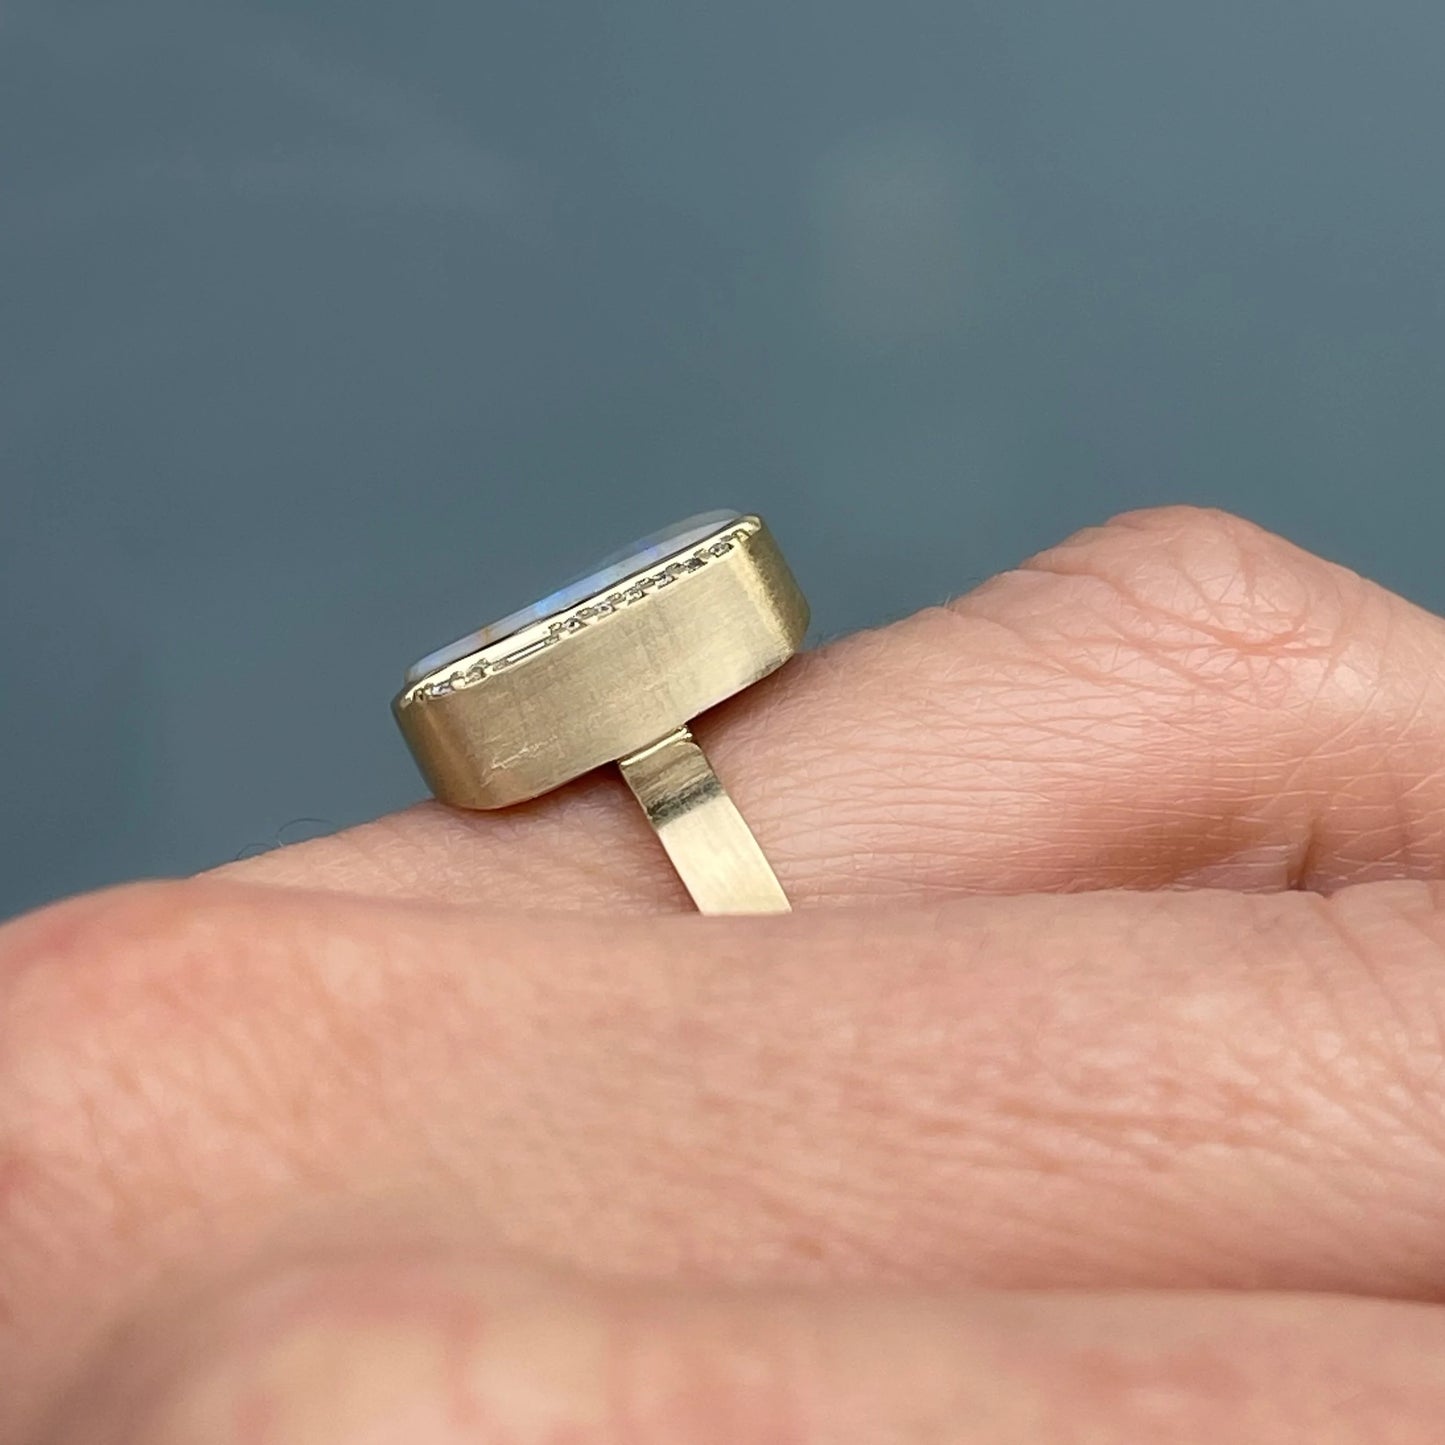 An Australian Opal Ring by NIXIN Jewelry is modeled on a hand and shown in profile to display the height of its gold setting.